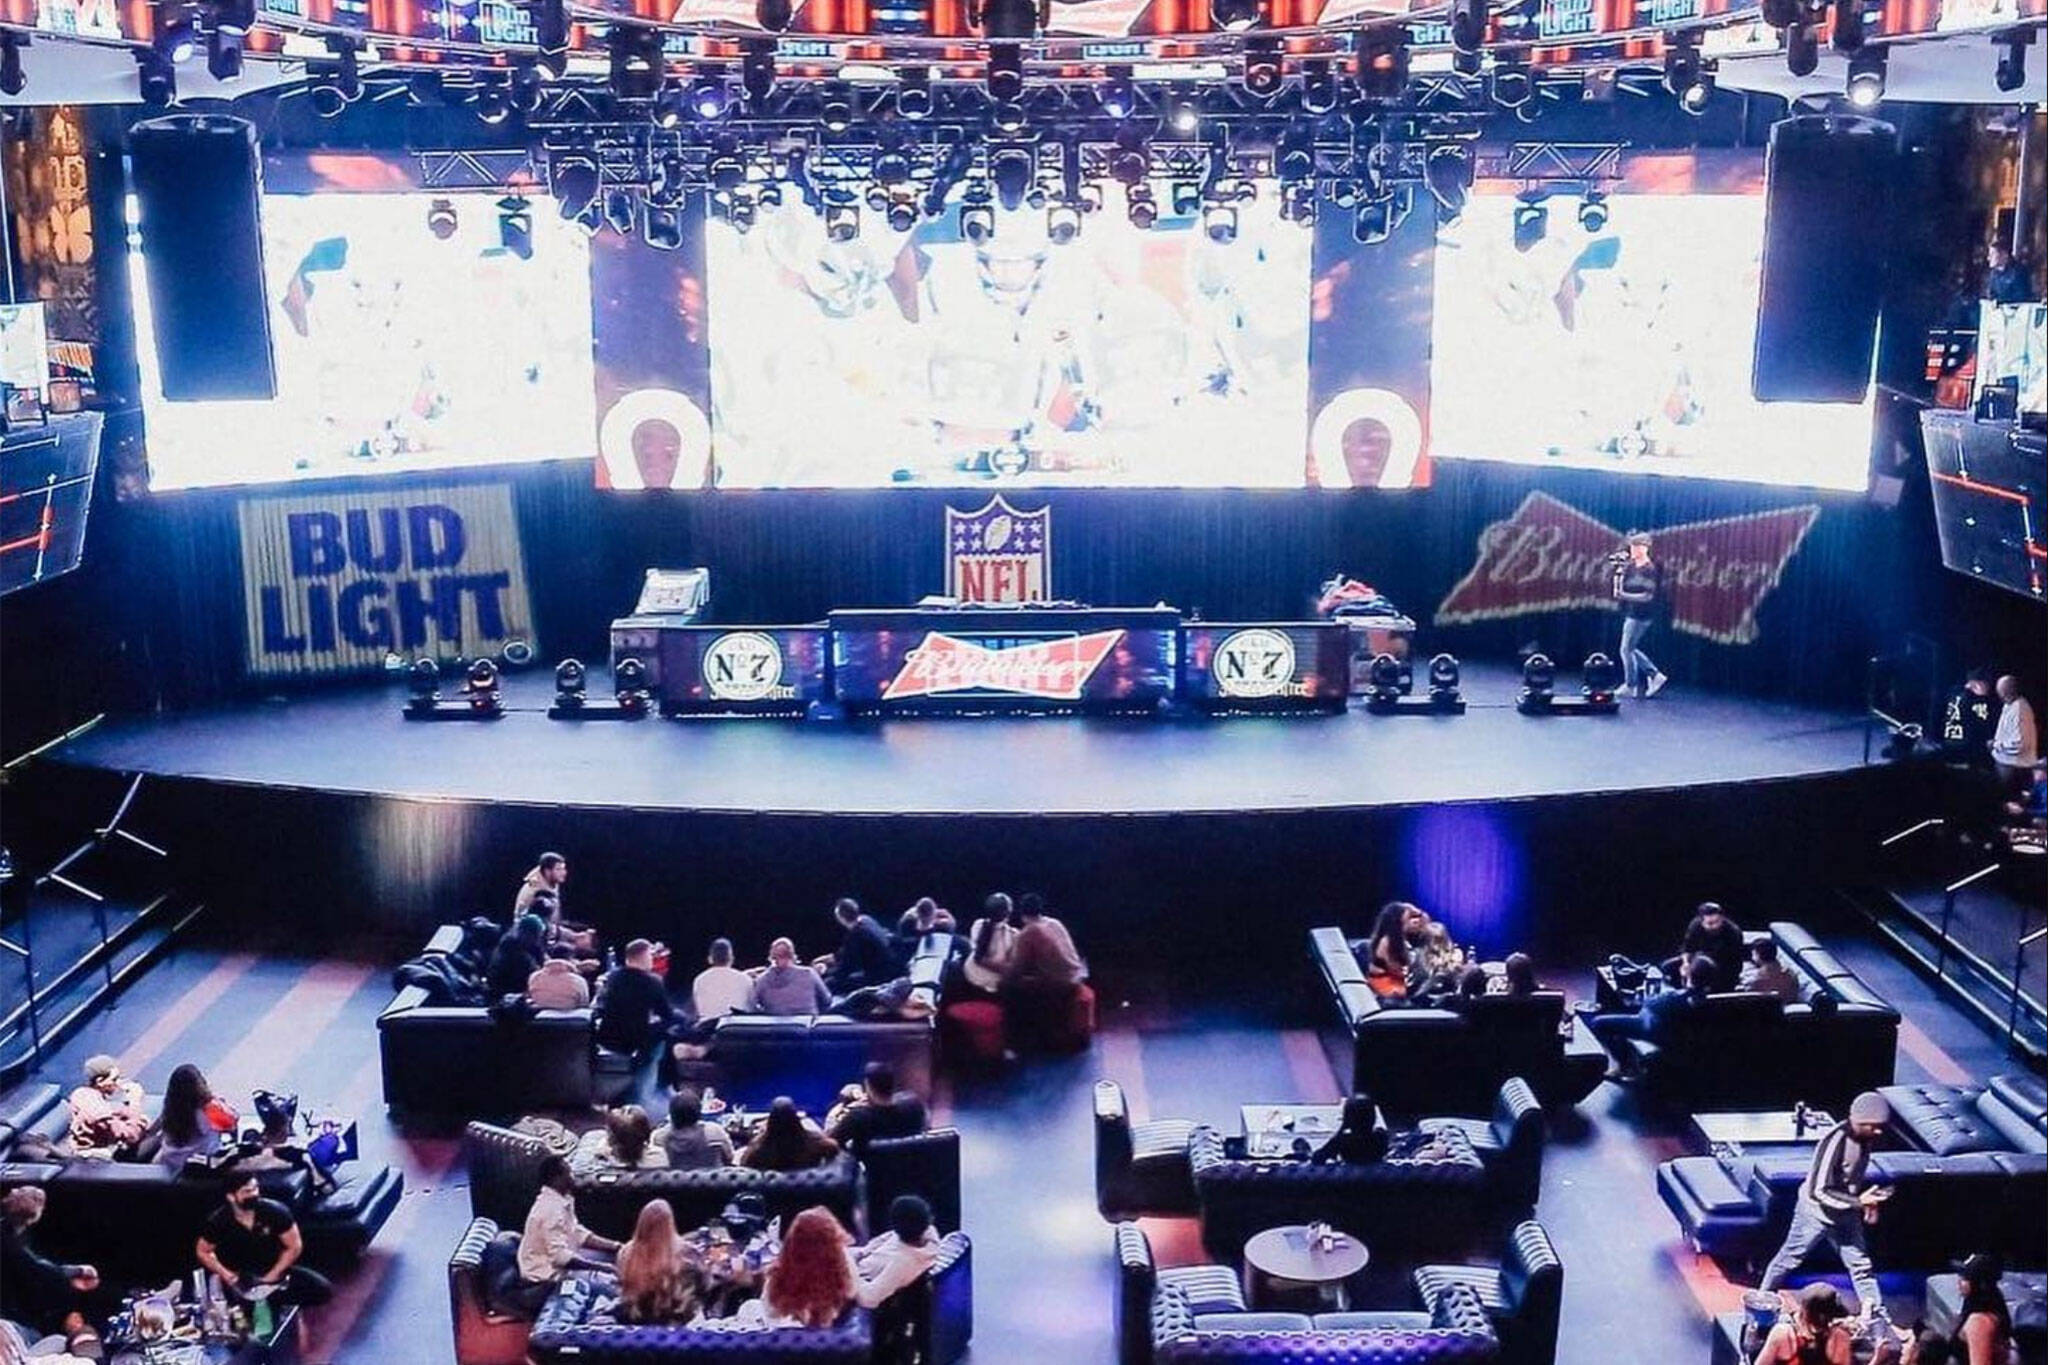 The largest Super Bowl viewing party in Canada is happening in Toronto